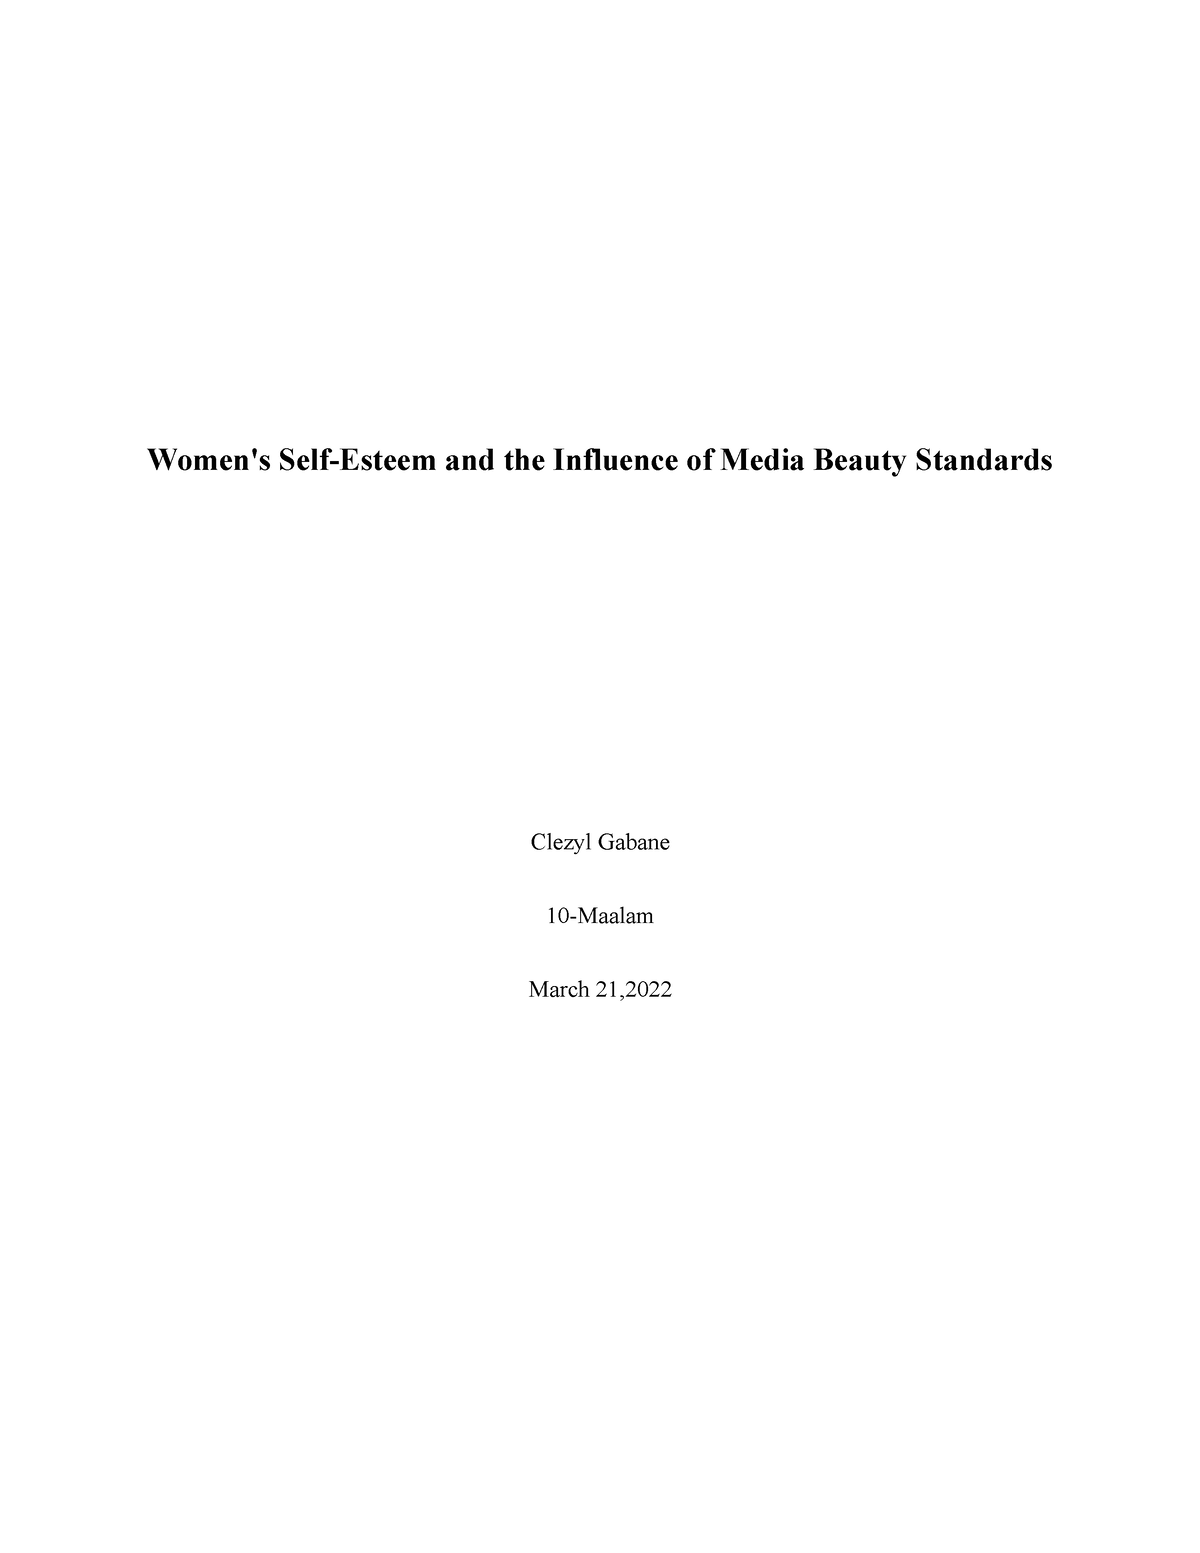 Beauty Standard Research Women's SelfEsteem and the Influence of